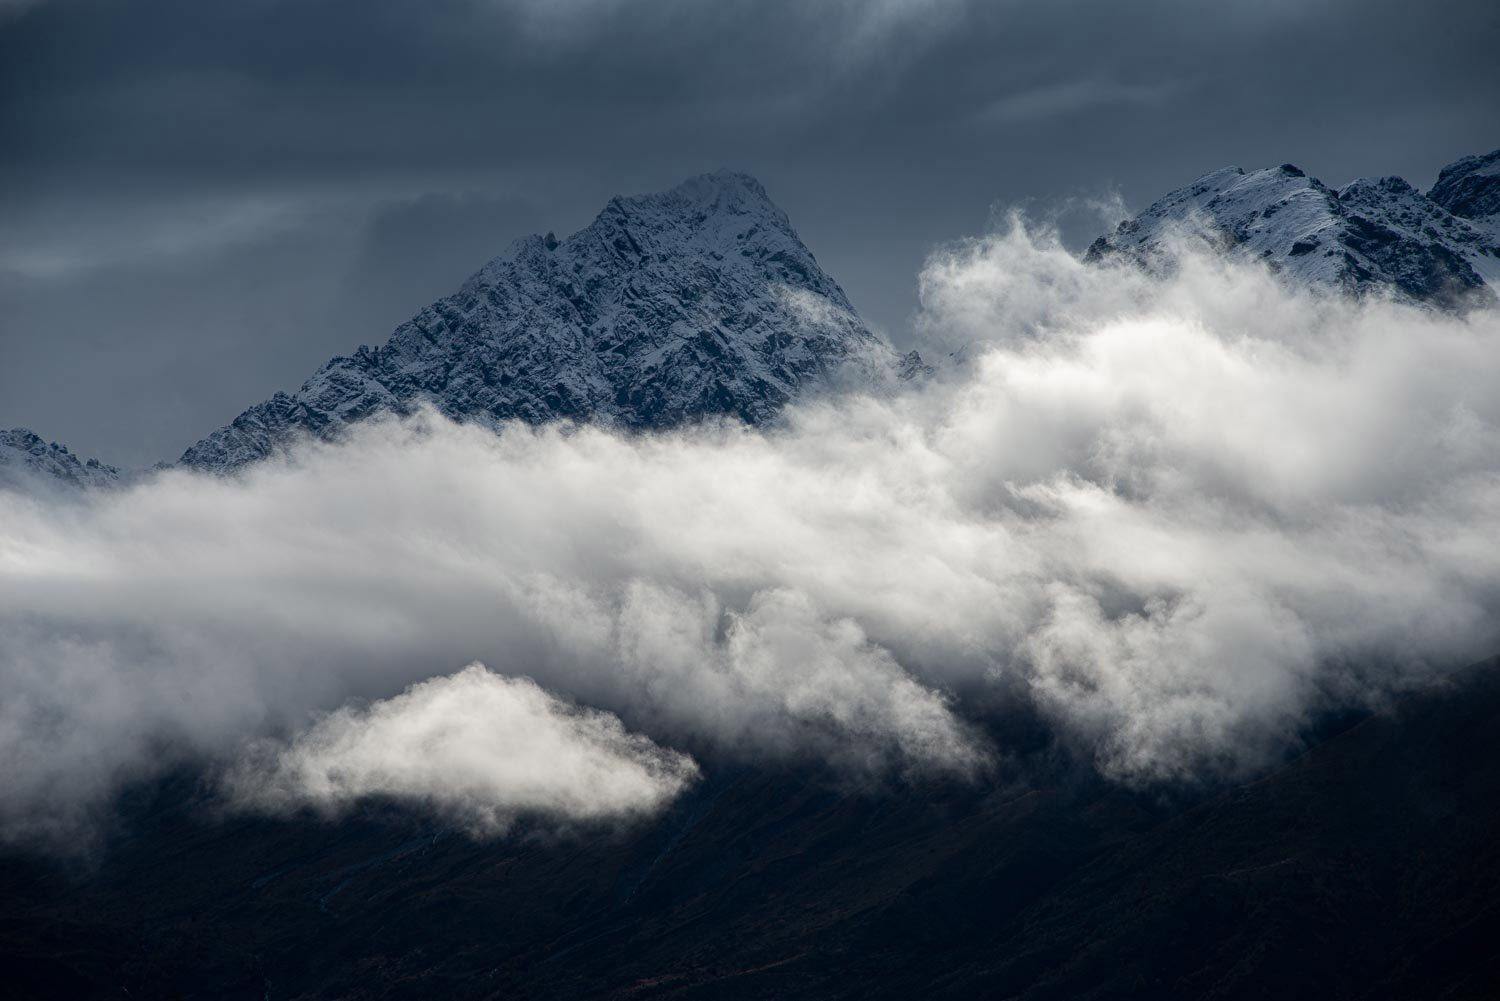 Black mountains with their peaks into the clouds, Mountainscape New Zealand Artwork